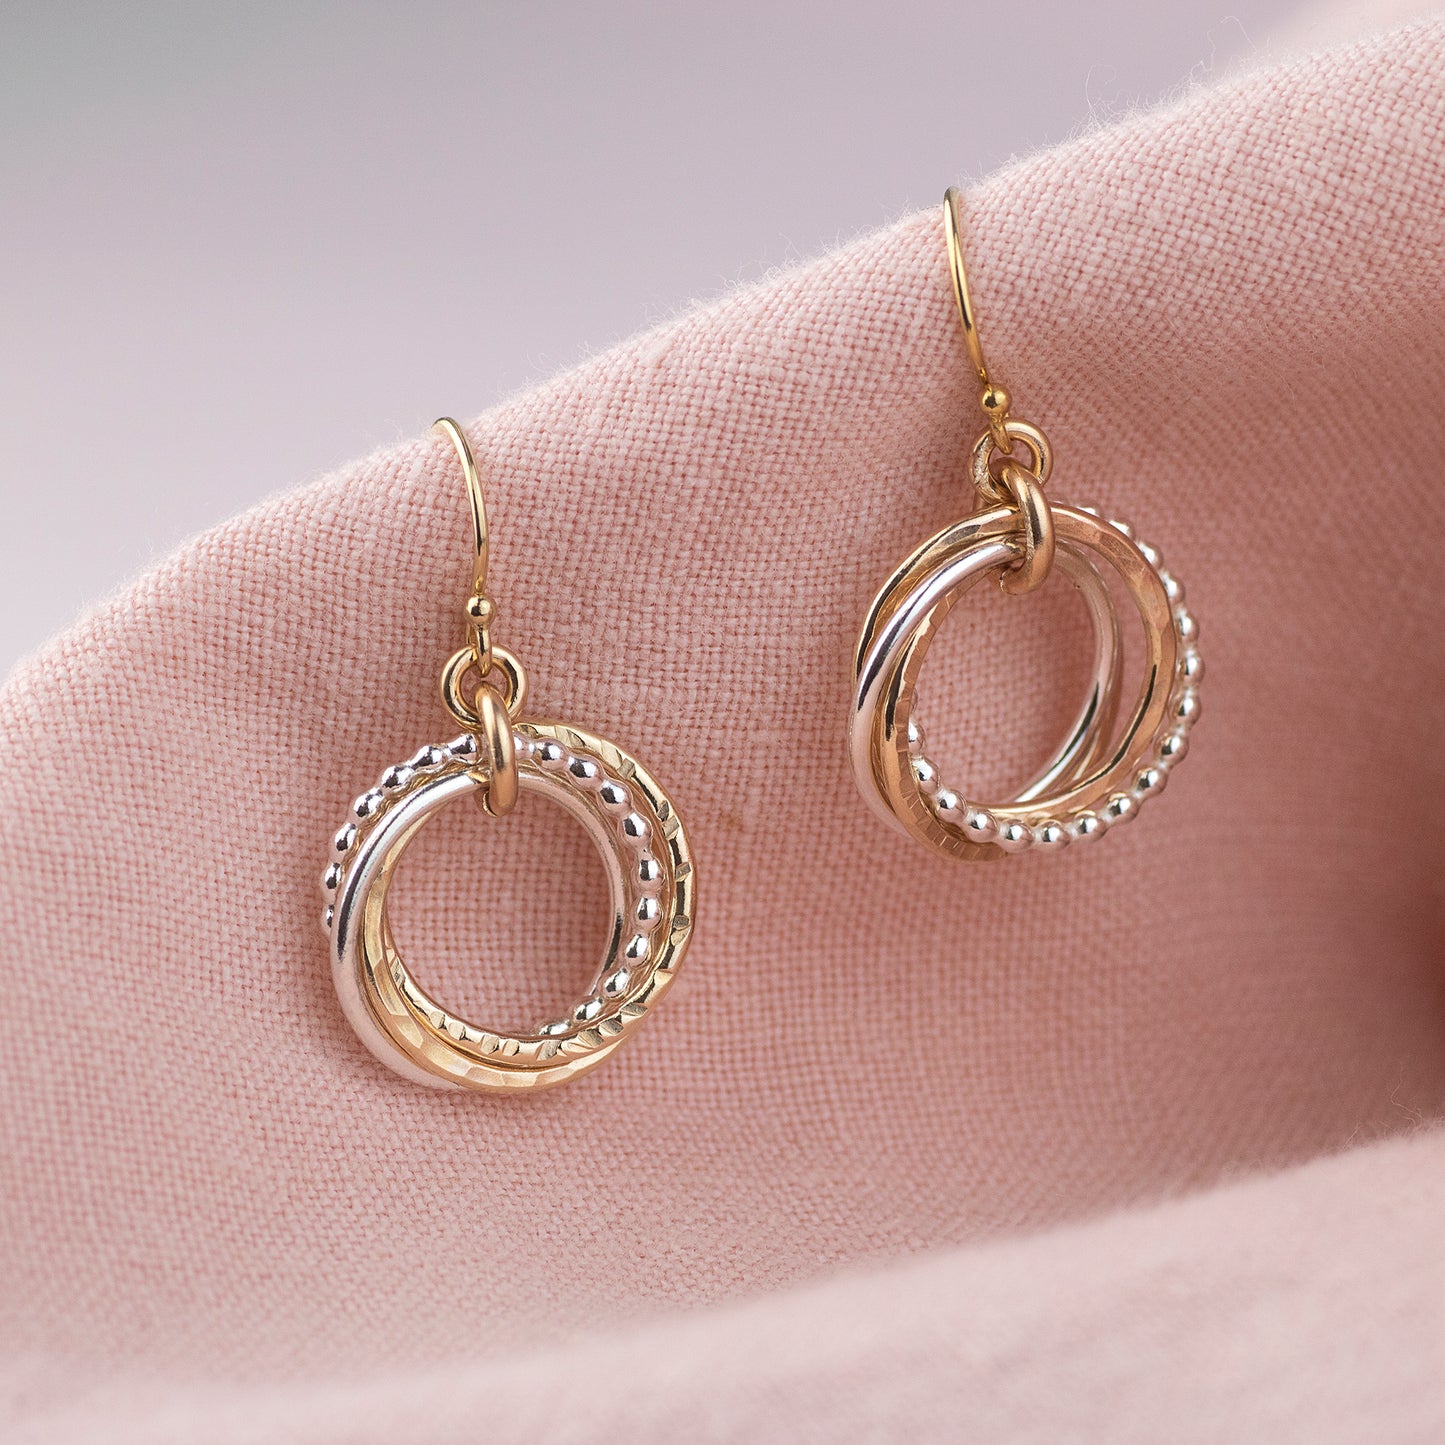 40th Birthday Earrings - The Original 4 Links for 4 Decades Earrings - Petite Silver & Gold